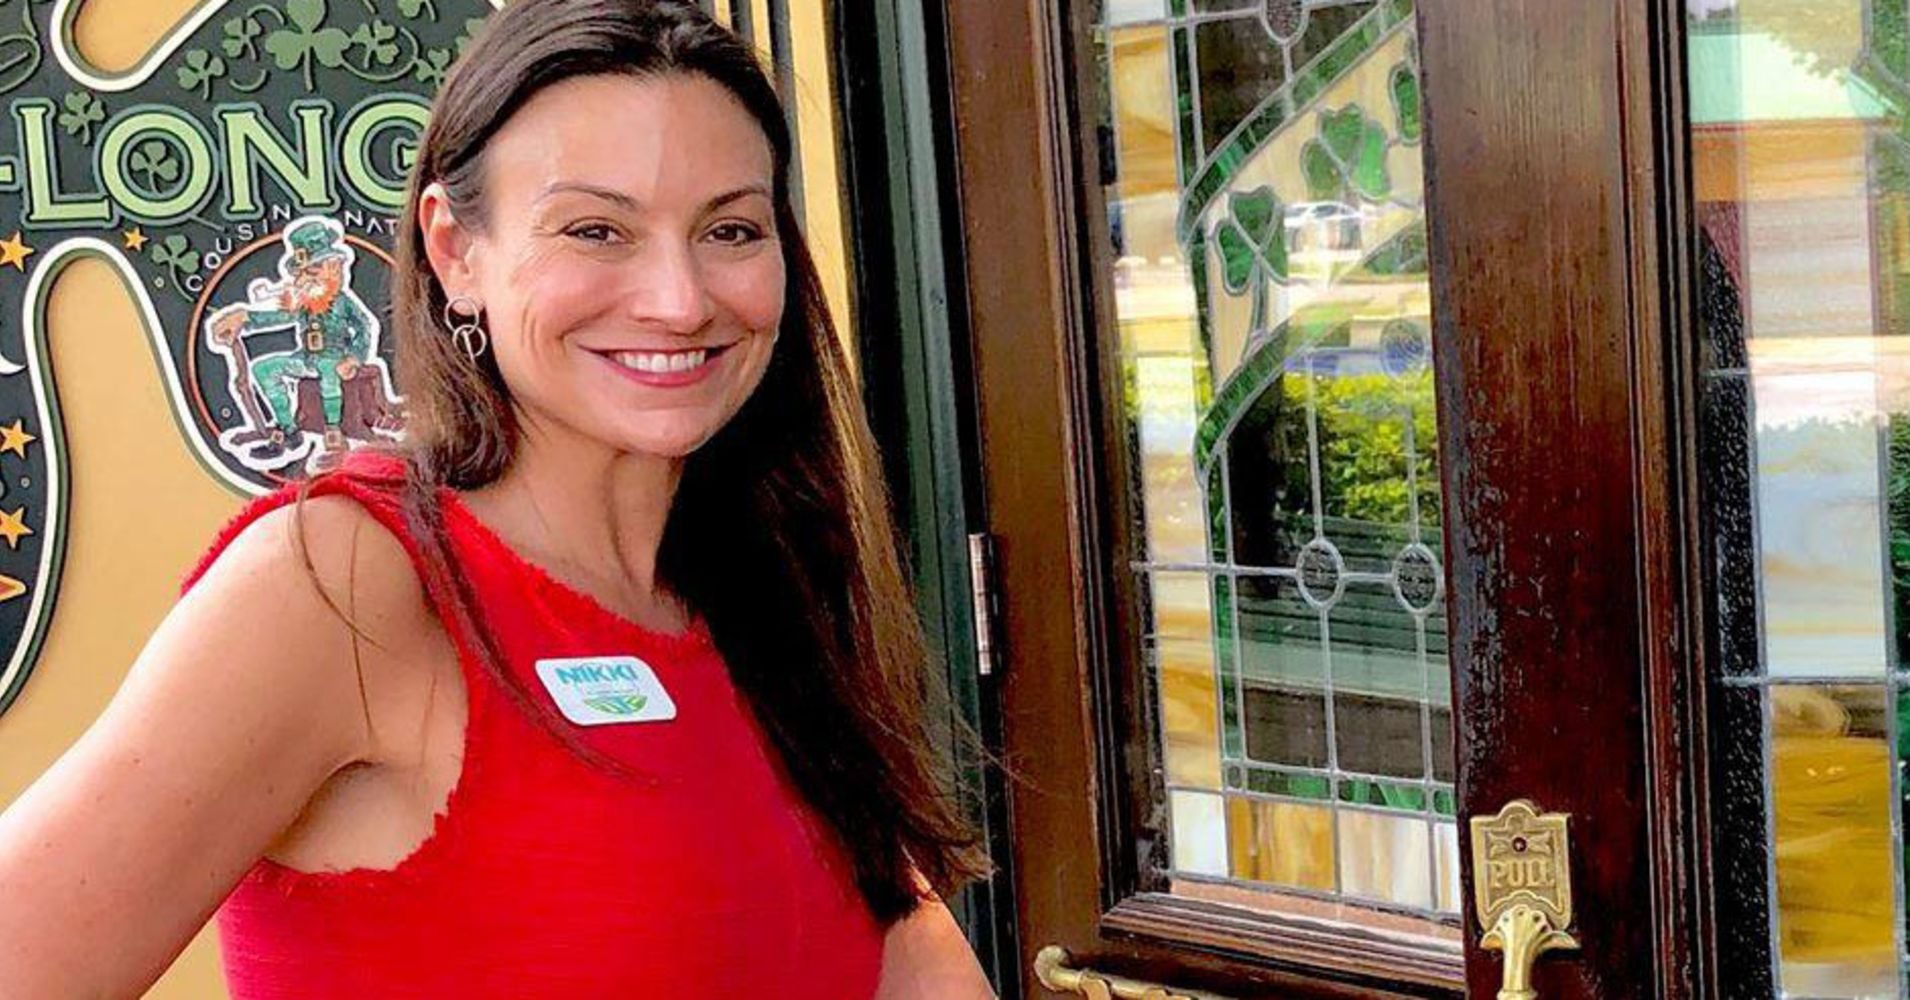 Wells Fargo closed the account of a political candidate over her support of medical marijuana